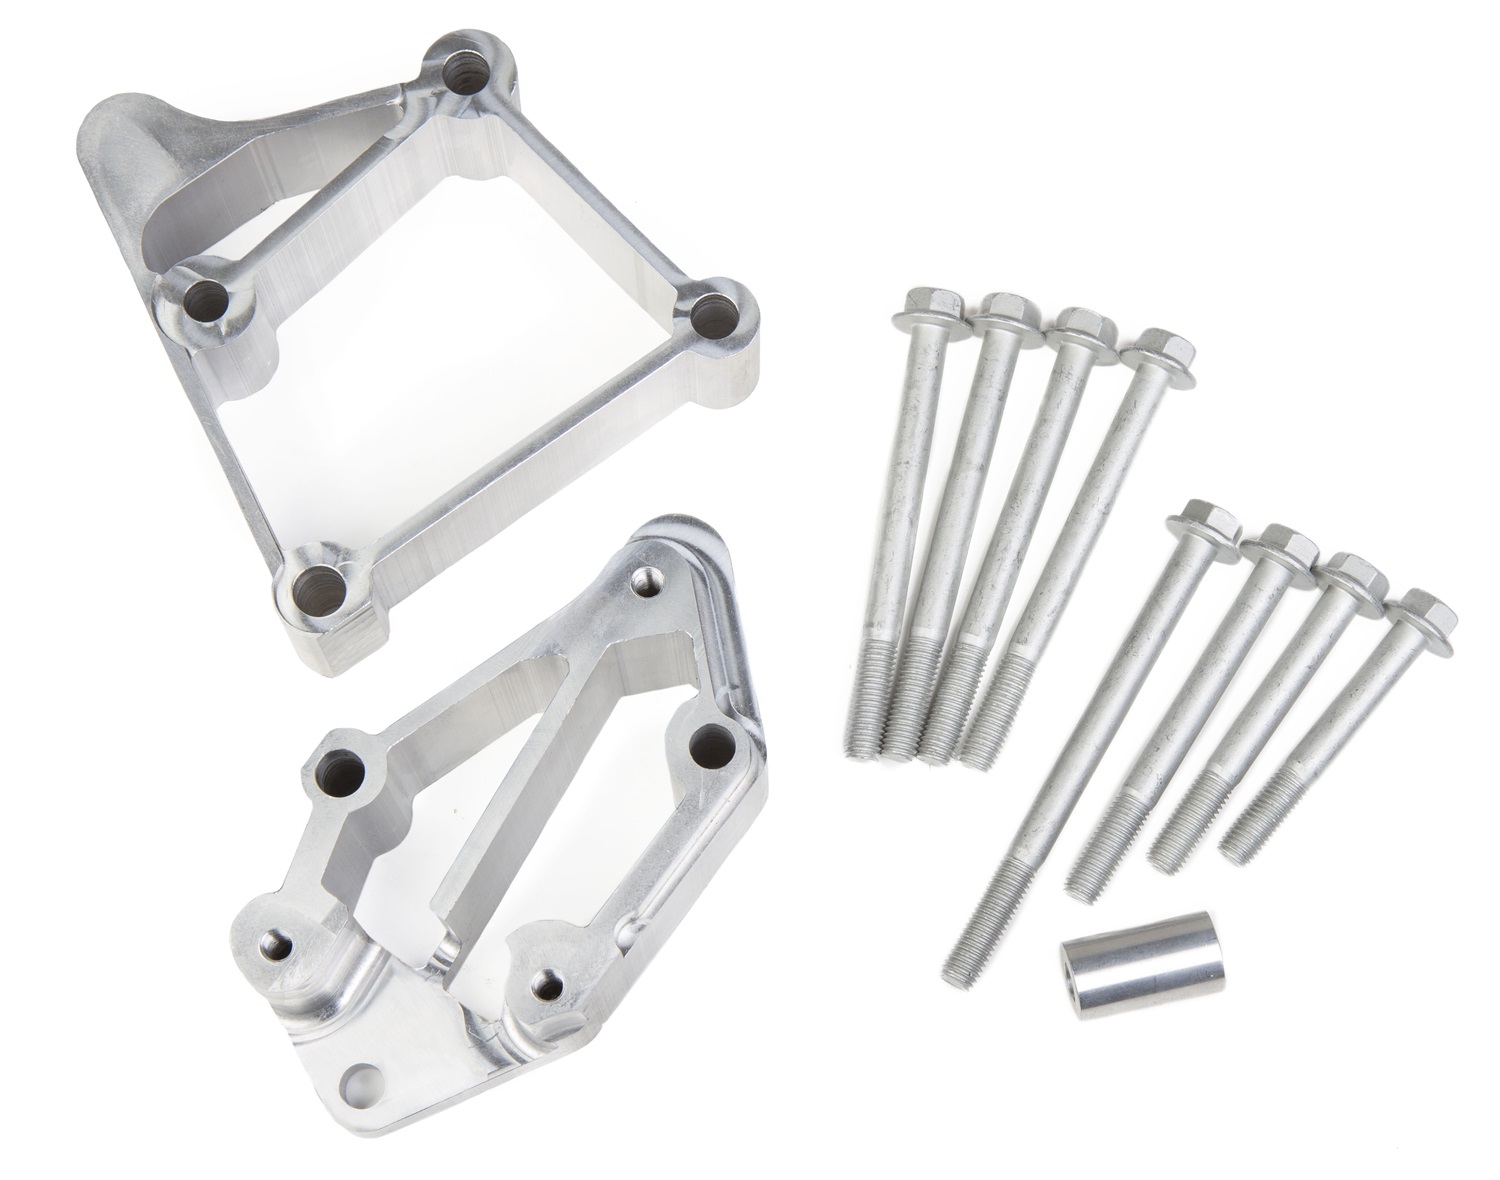 Holley Performance Holley Performance 21-3 LS Accessory Drive Bracket Kit